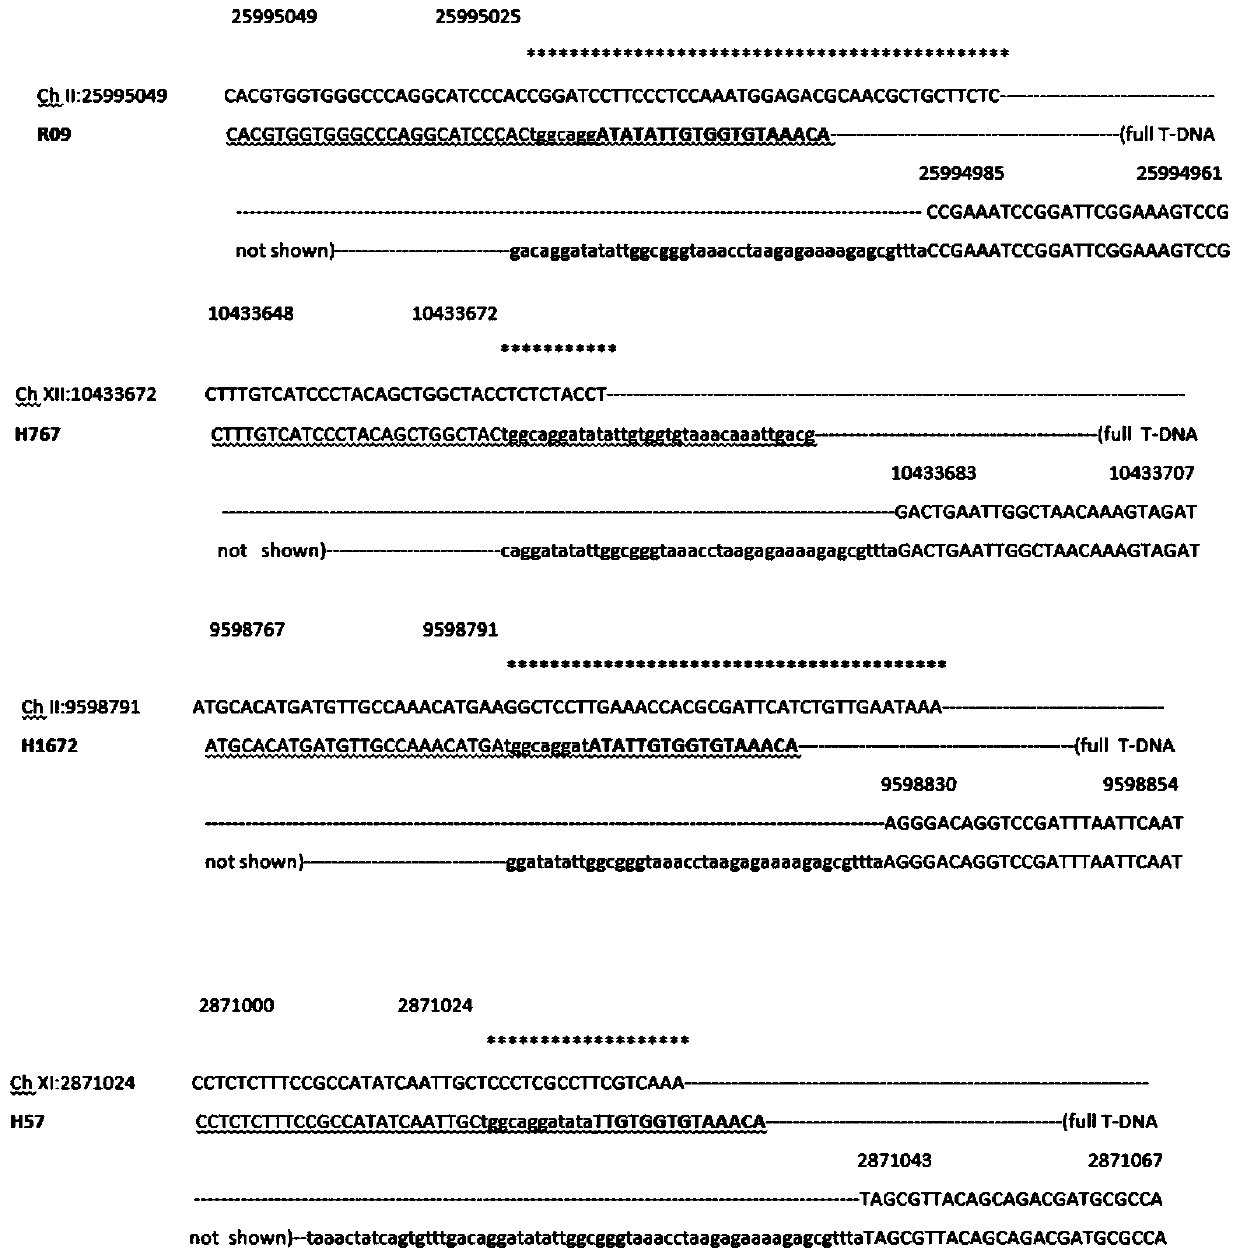 Indica rice target line for gene stacking of specific sites mediated by recombinase